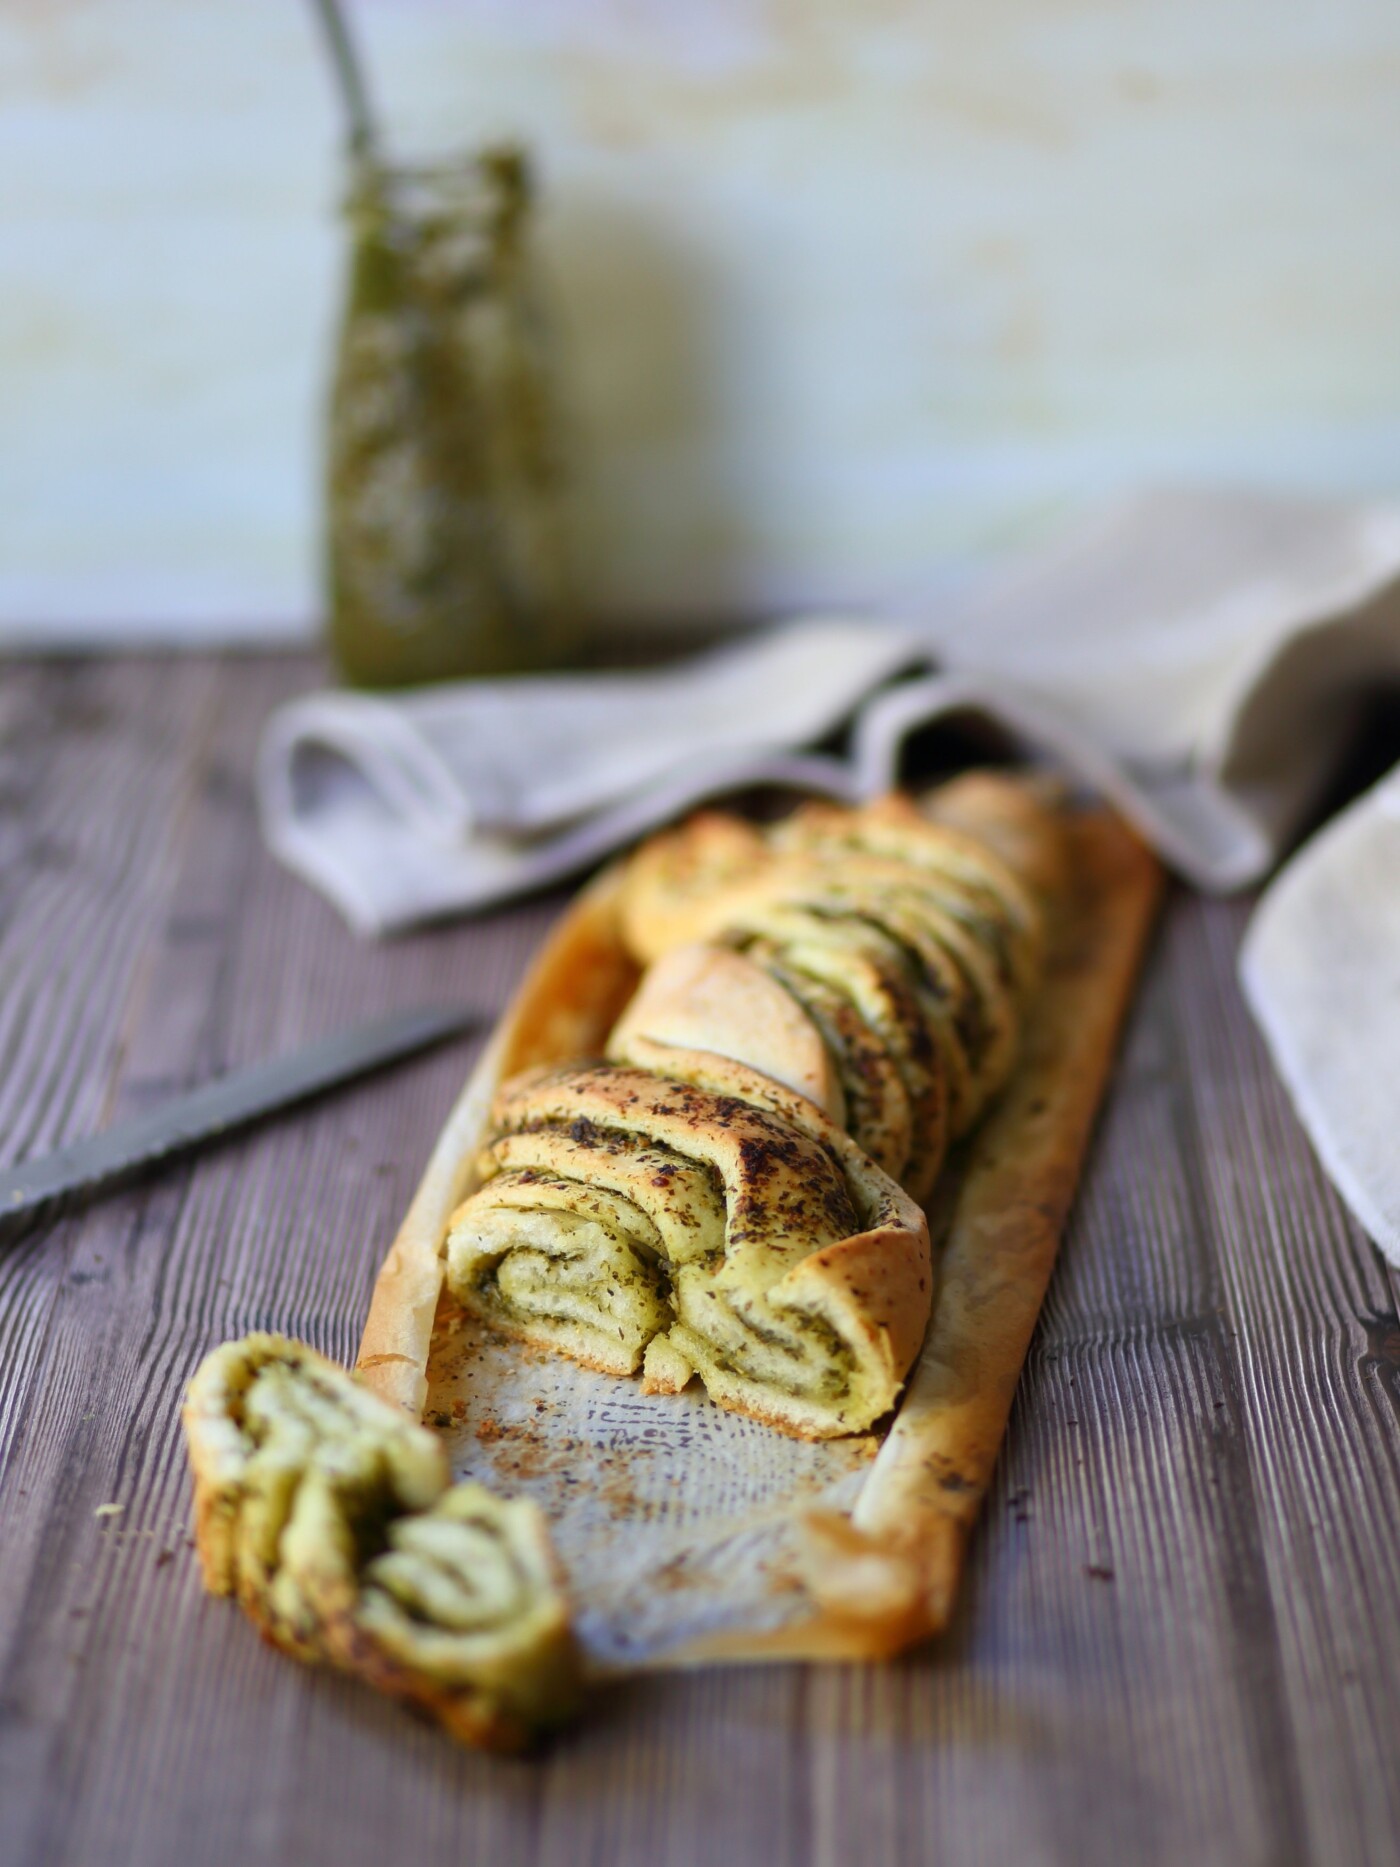 I am addicted to basil pesto - so I had to try this delicious braided pesto bread. There's nothing like a fresh warm bread, and I love the beautiful braids and striations. 